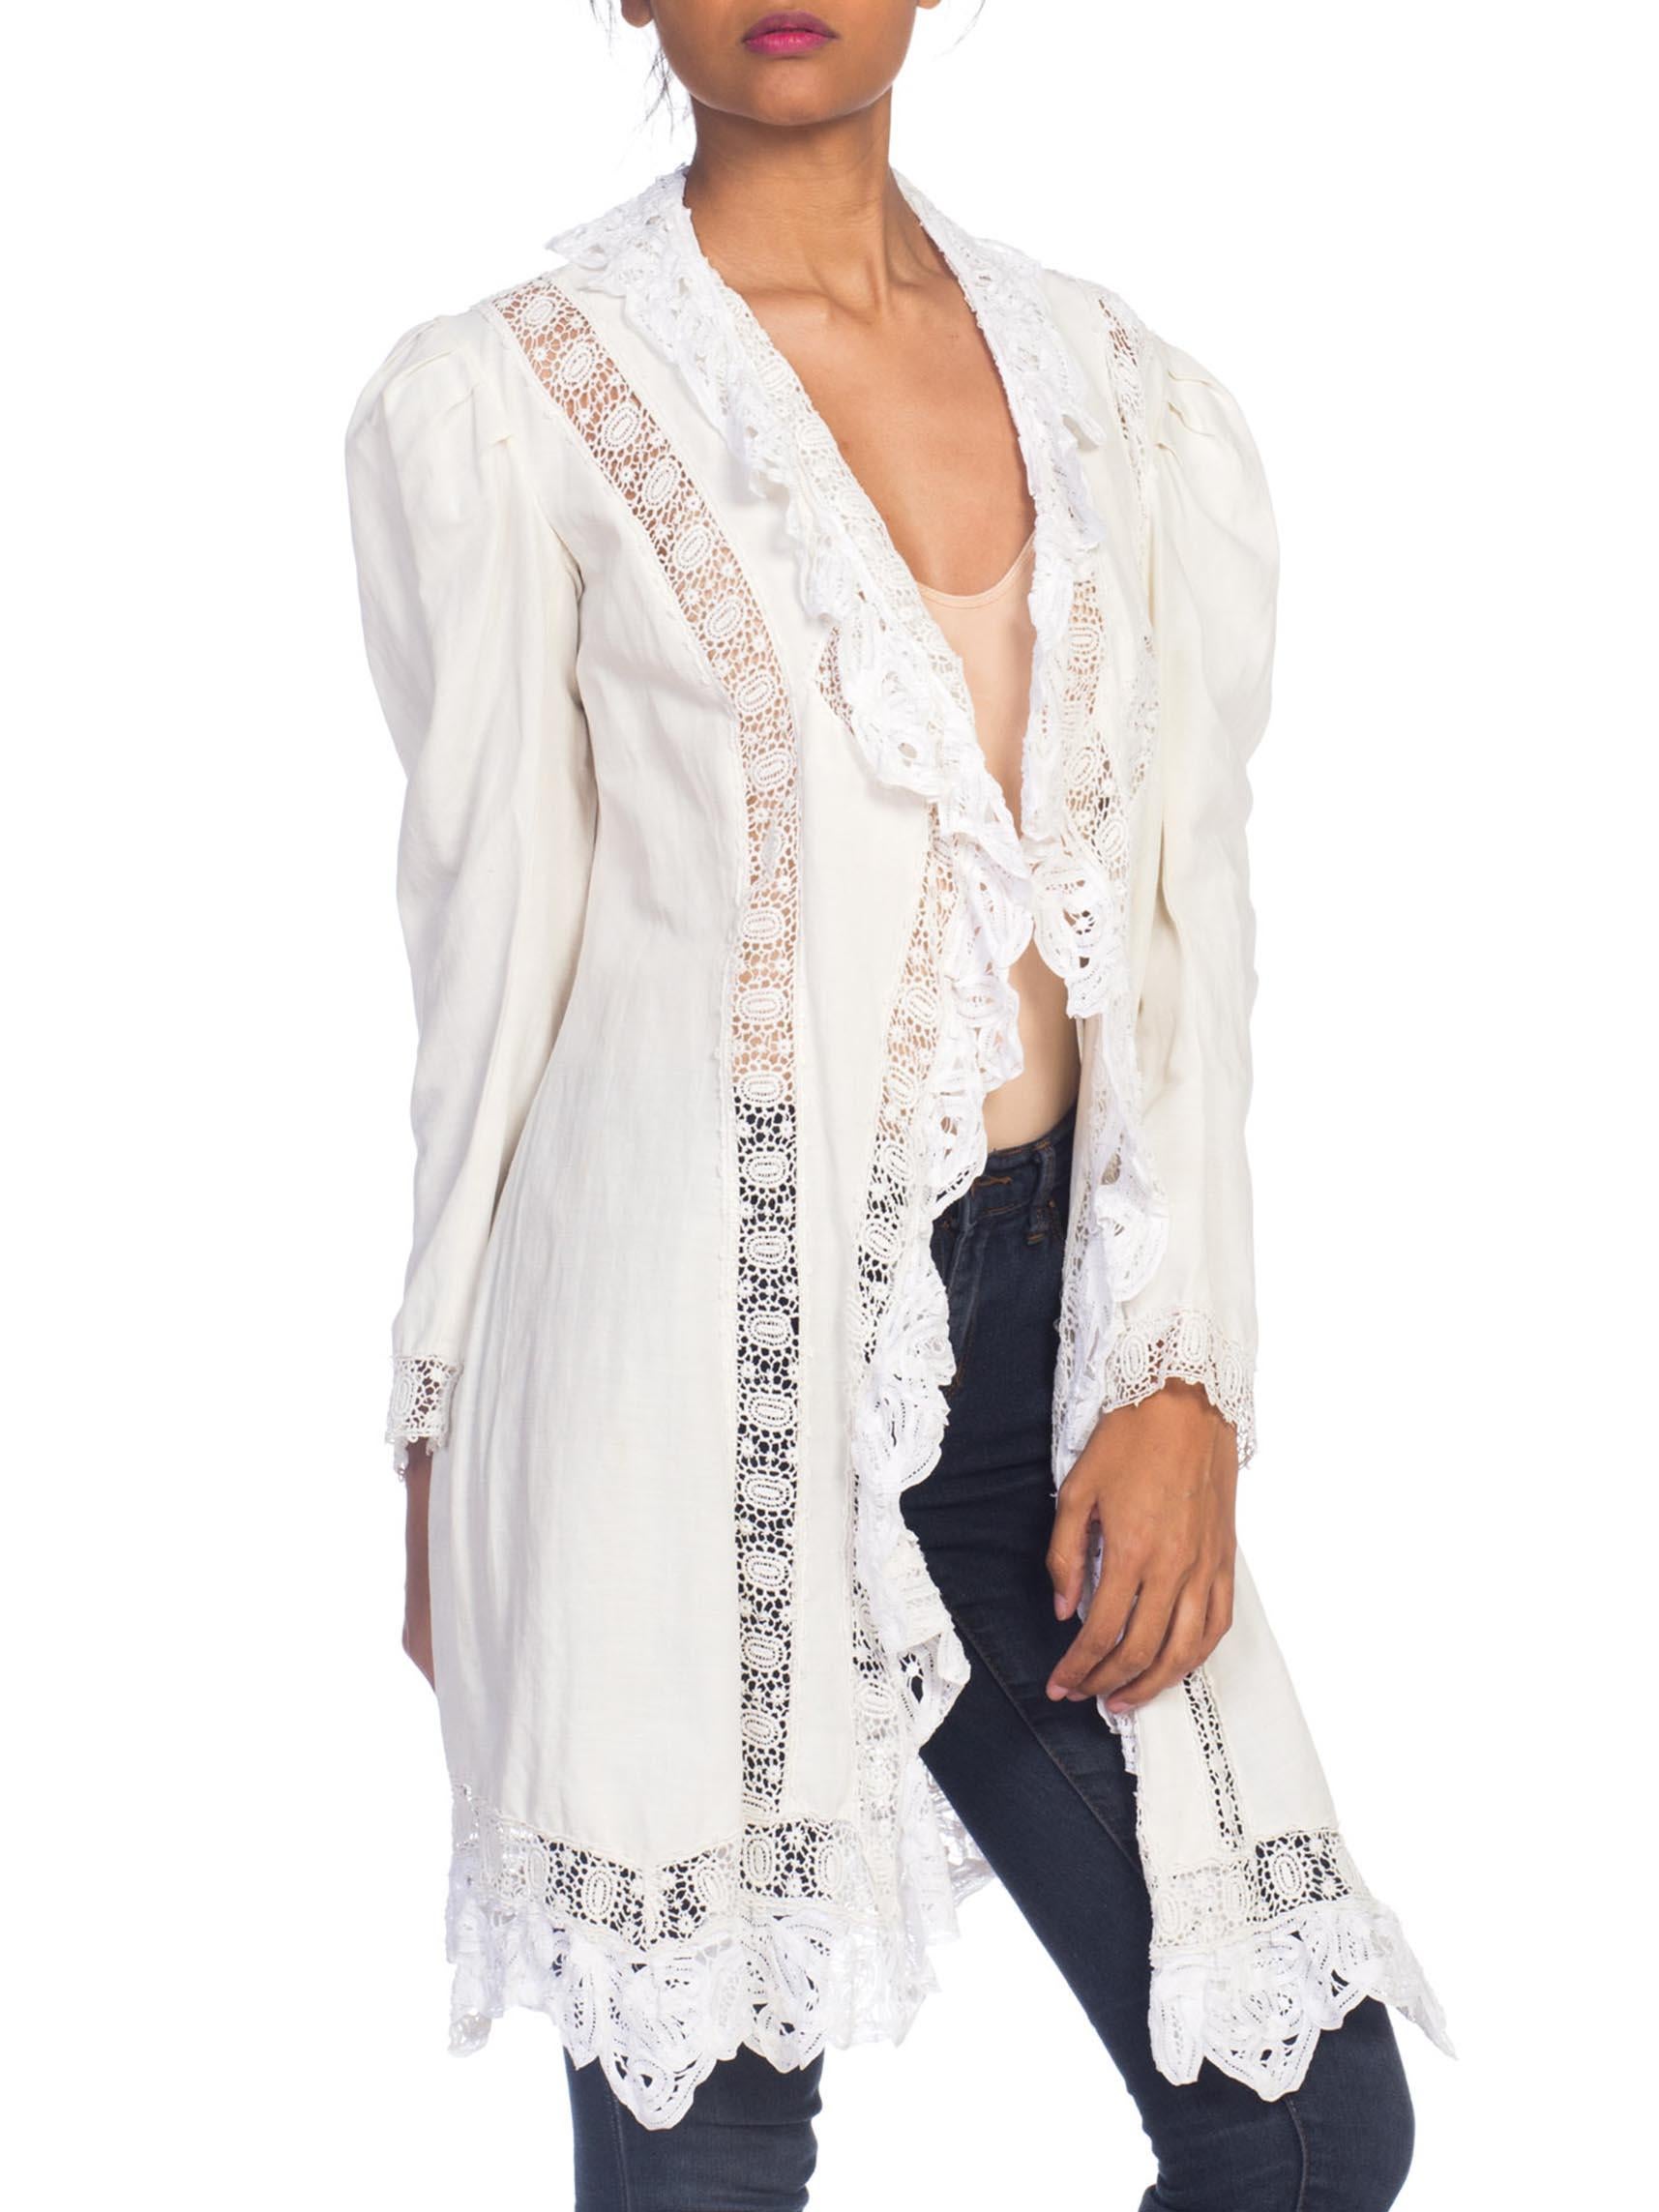 Women's Victorian White Organic Cotton Jacket With Handmade Lace Trim For Sale